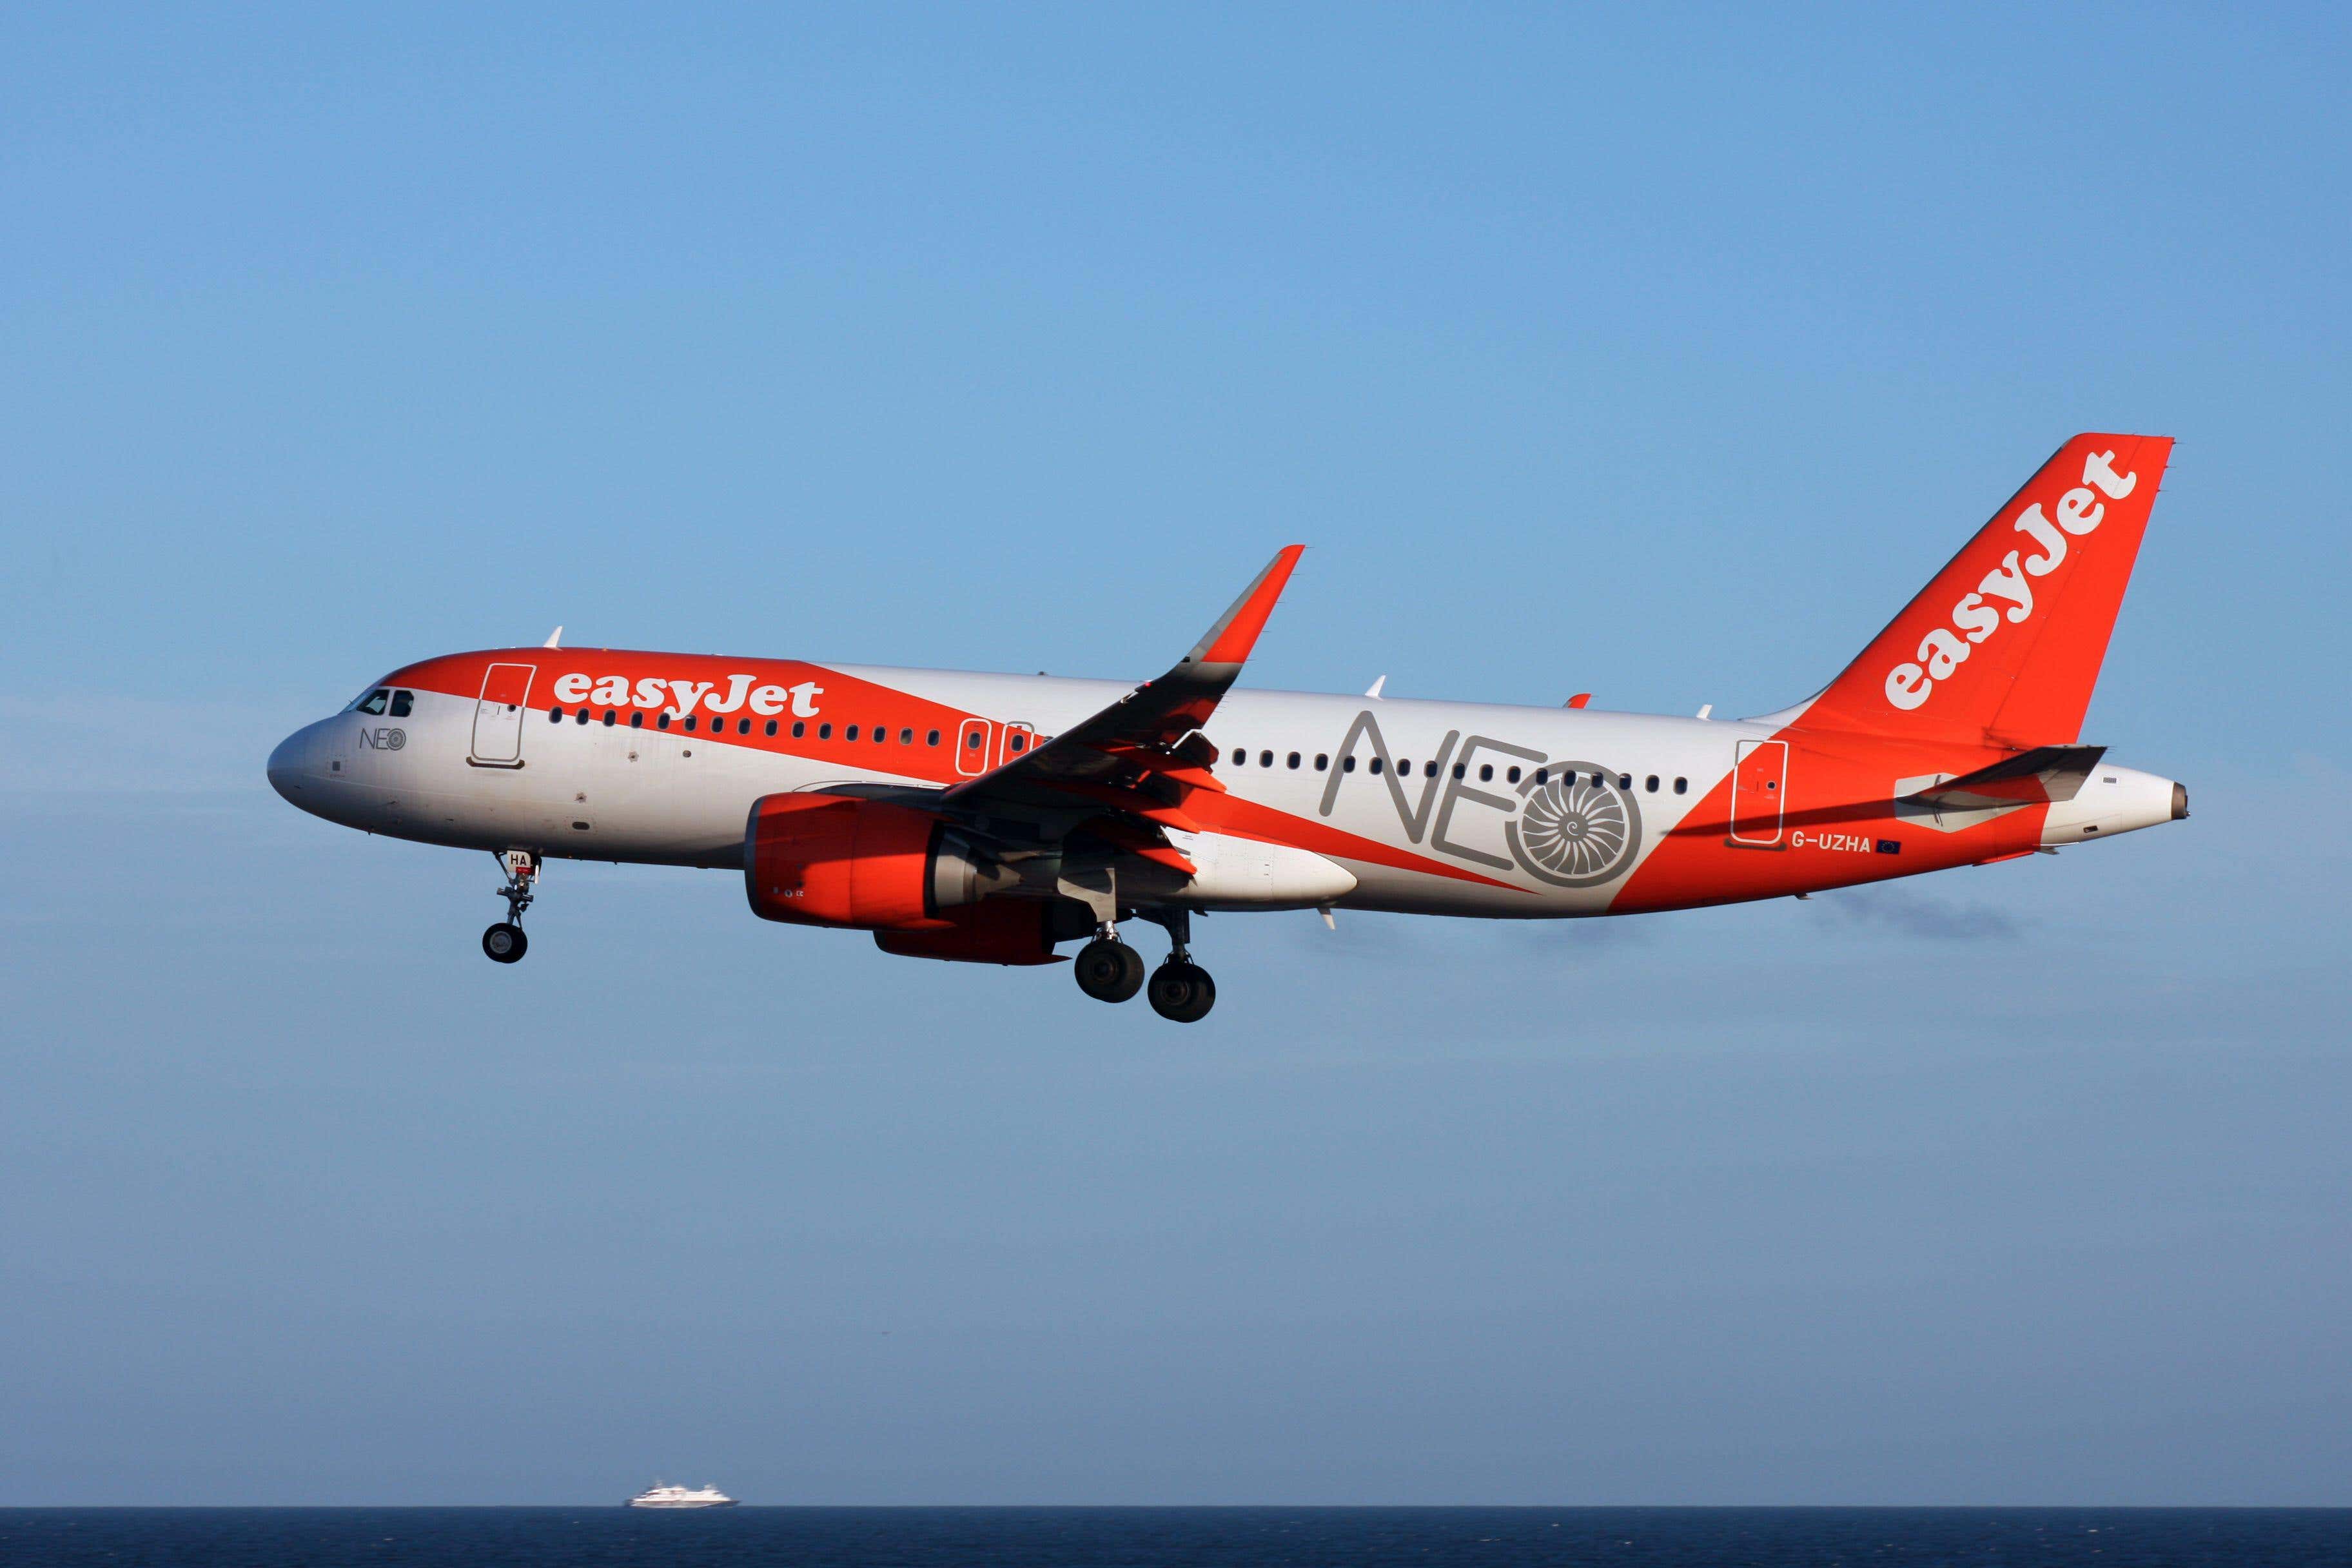 EasyJet plan to roll out the technology to 10 of its planes in the coming months